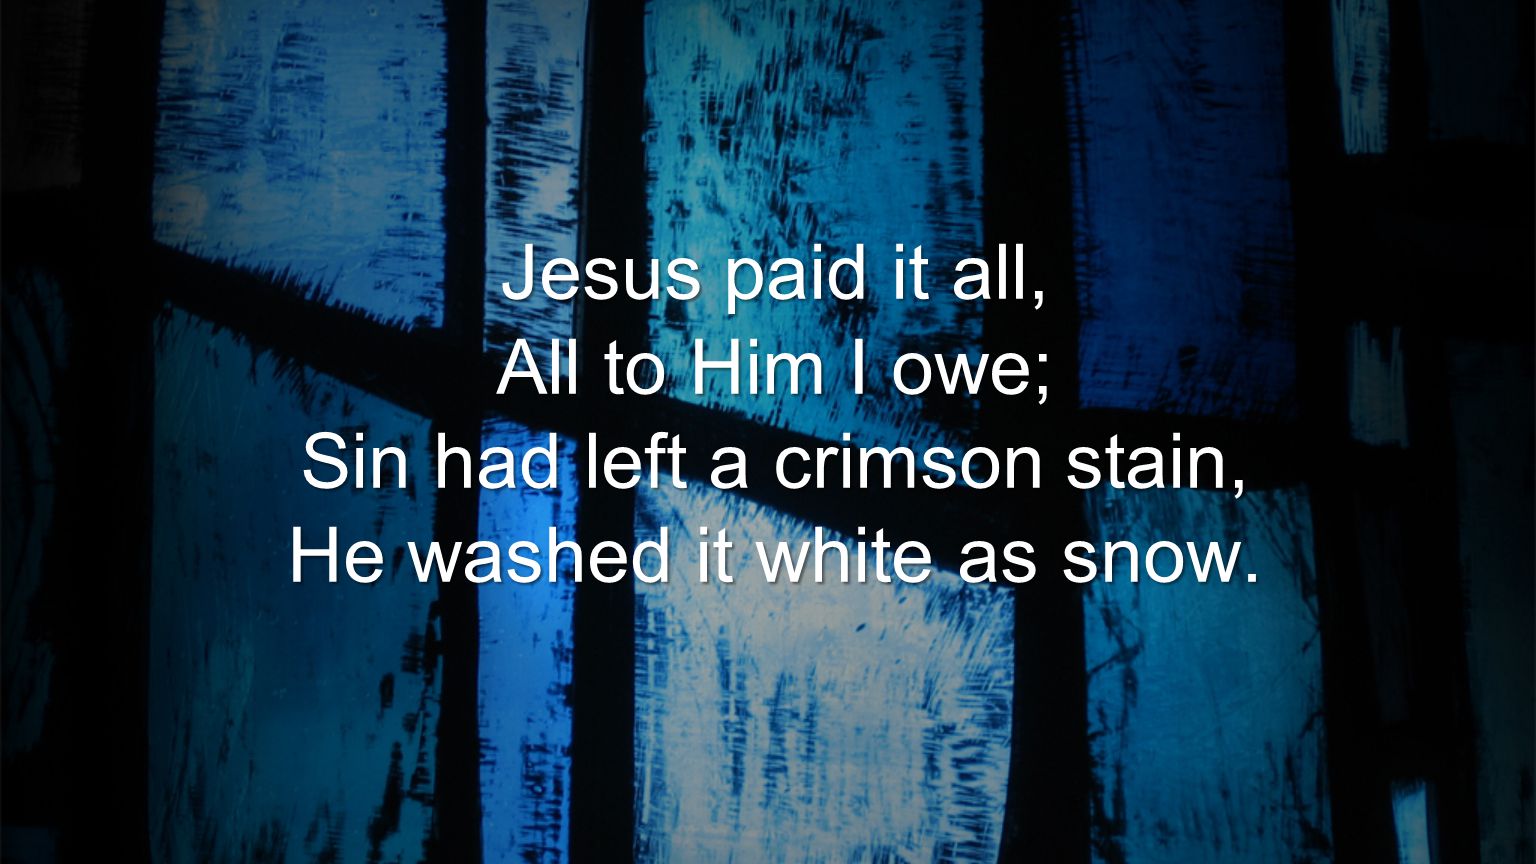 Sin had left a crimson stain, He washed it white as snow.